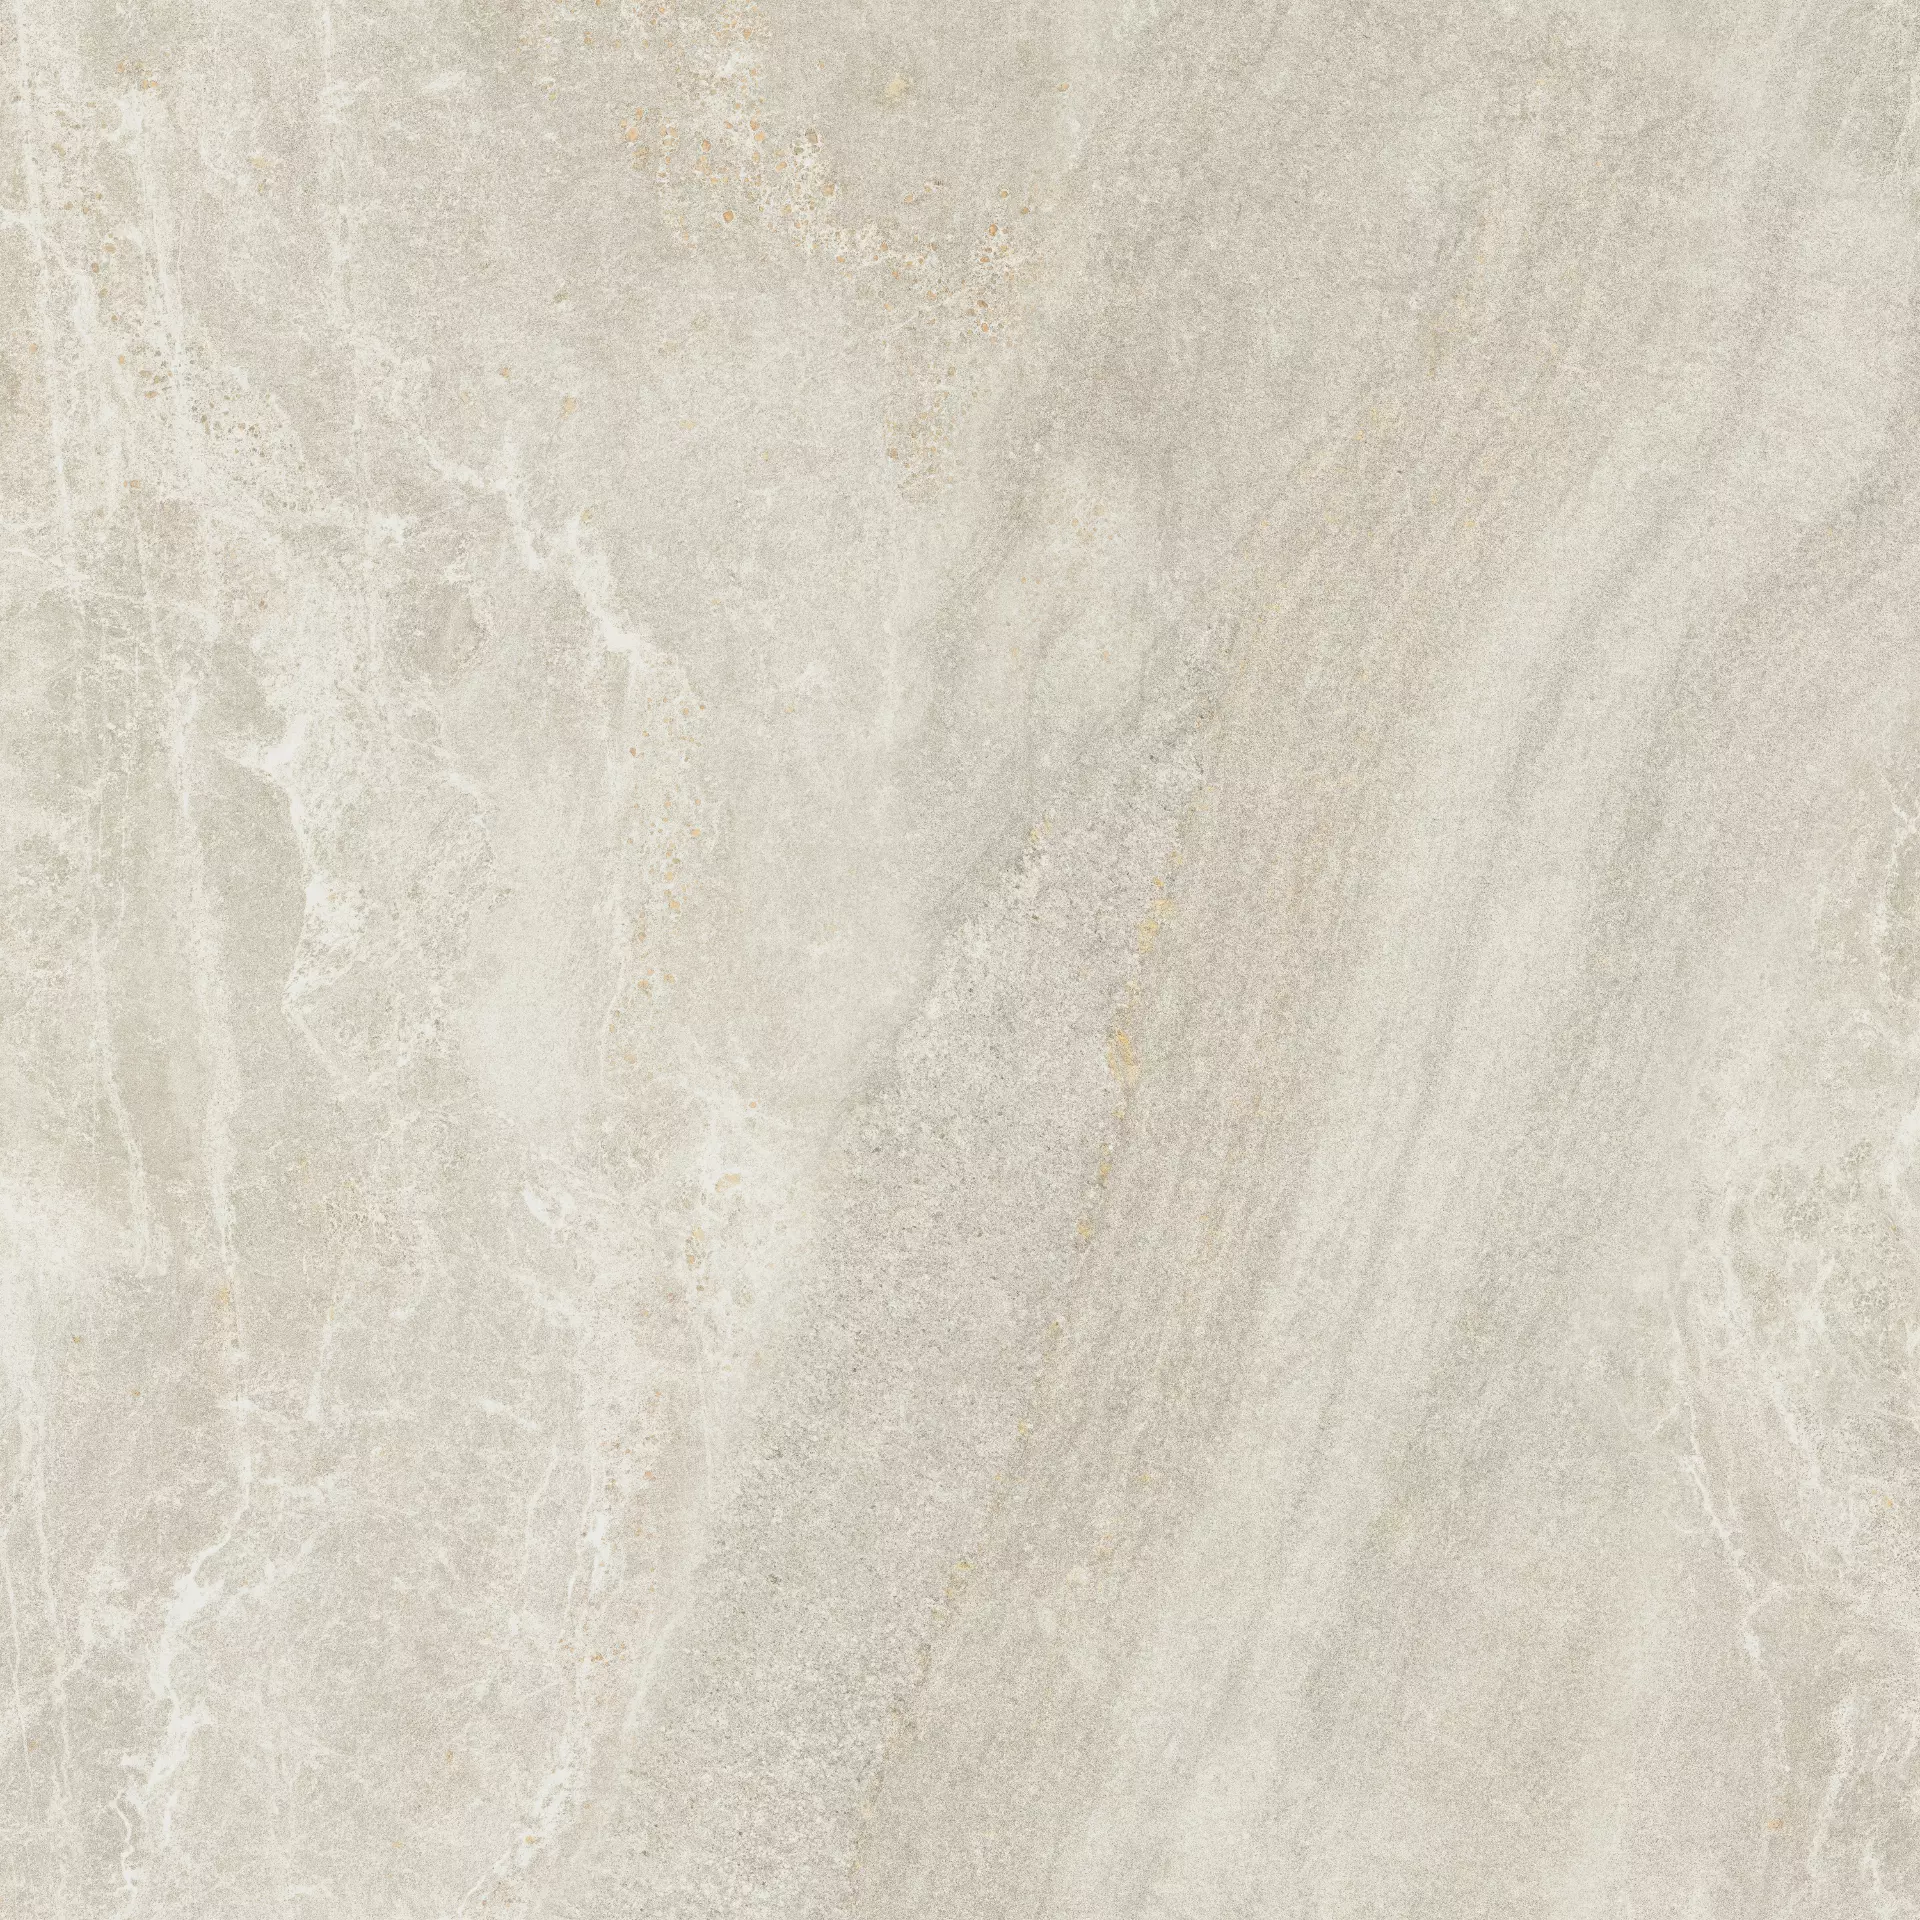 Panaria The Place Midtown White Antibacterial - Naturale PGGP940 90x90cm rectified 9mm